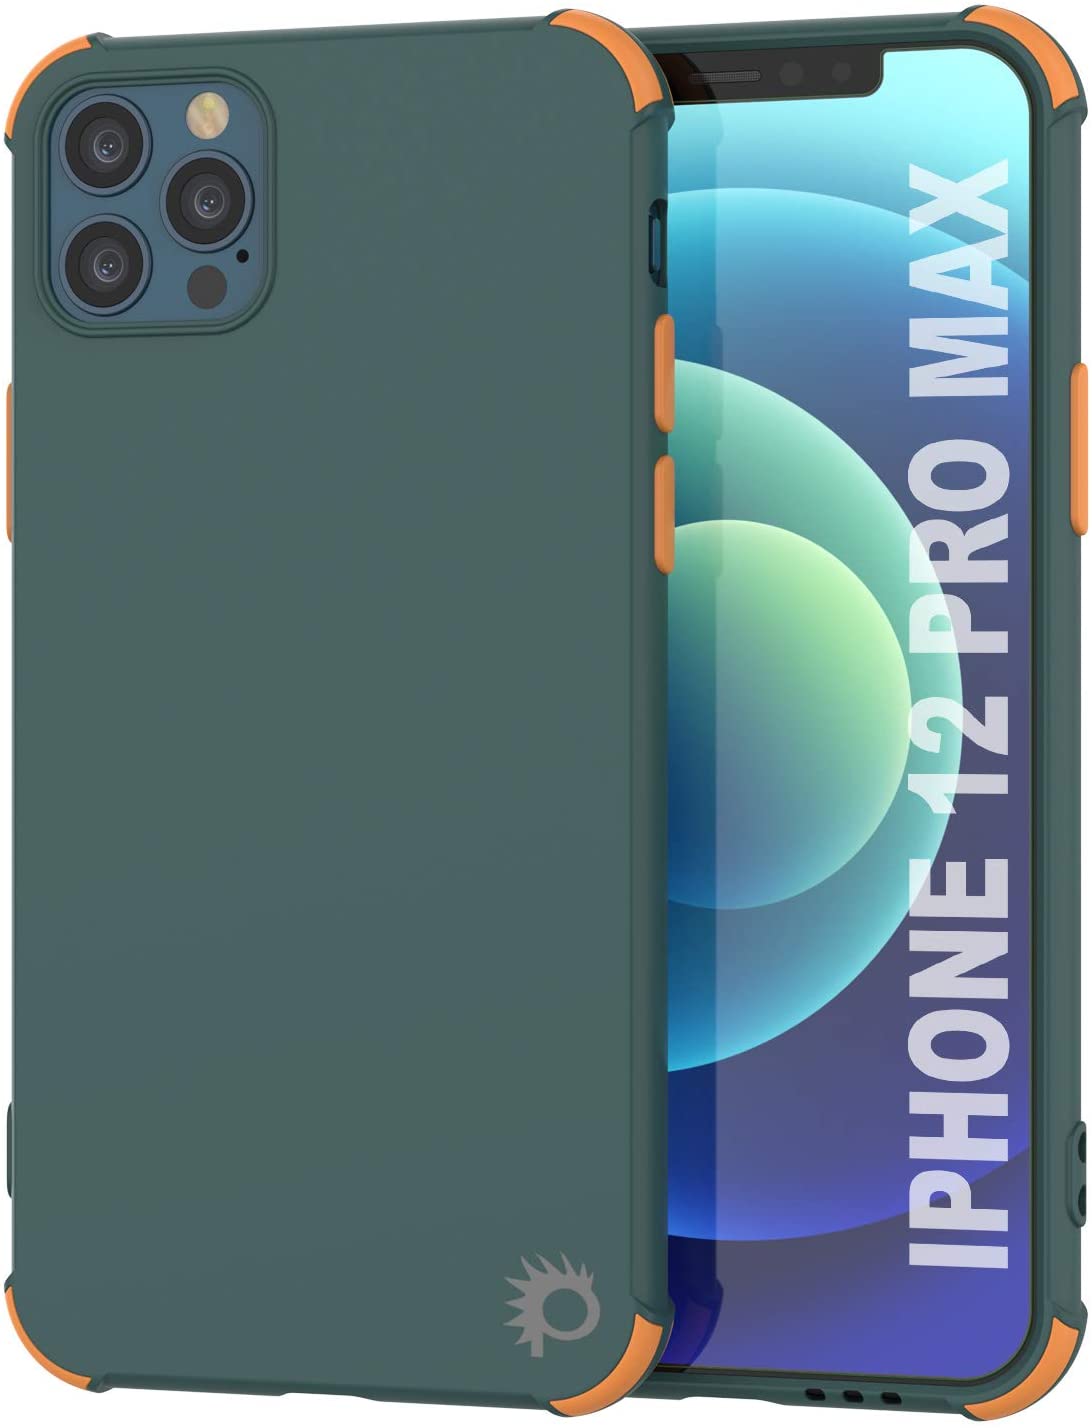 Punkcase Protective & Lightweight TPU Case [Sunshine Series] for iPhone 12 Pro Max [Dark Green] (Color in image: Dark Green)